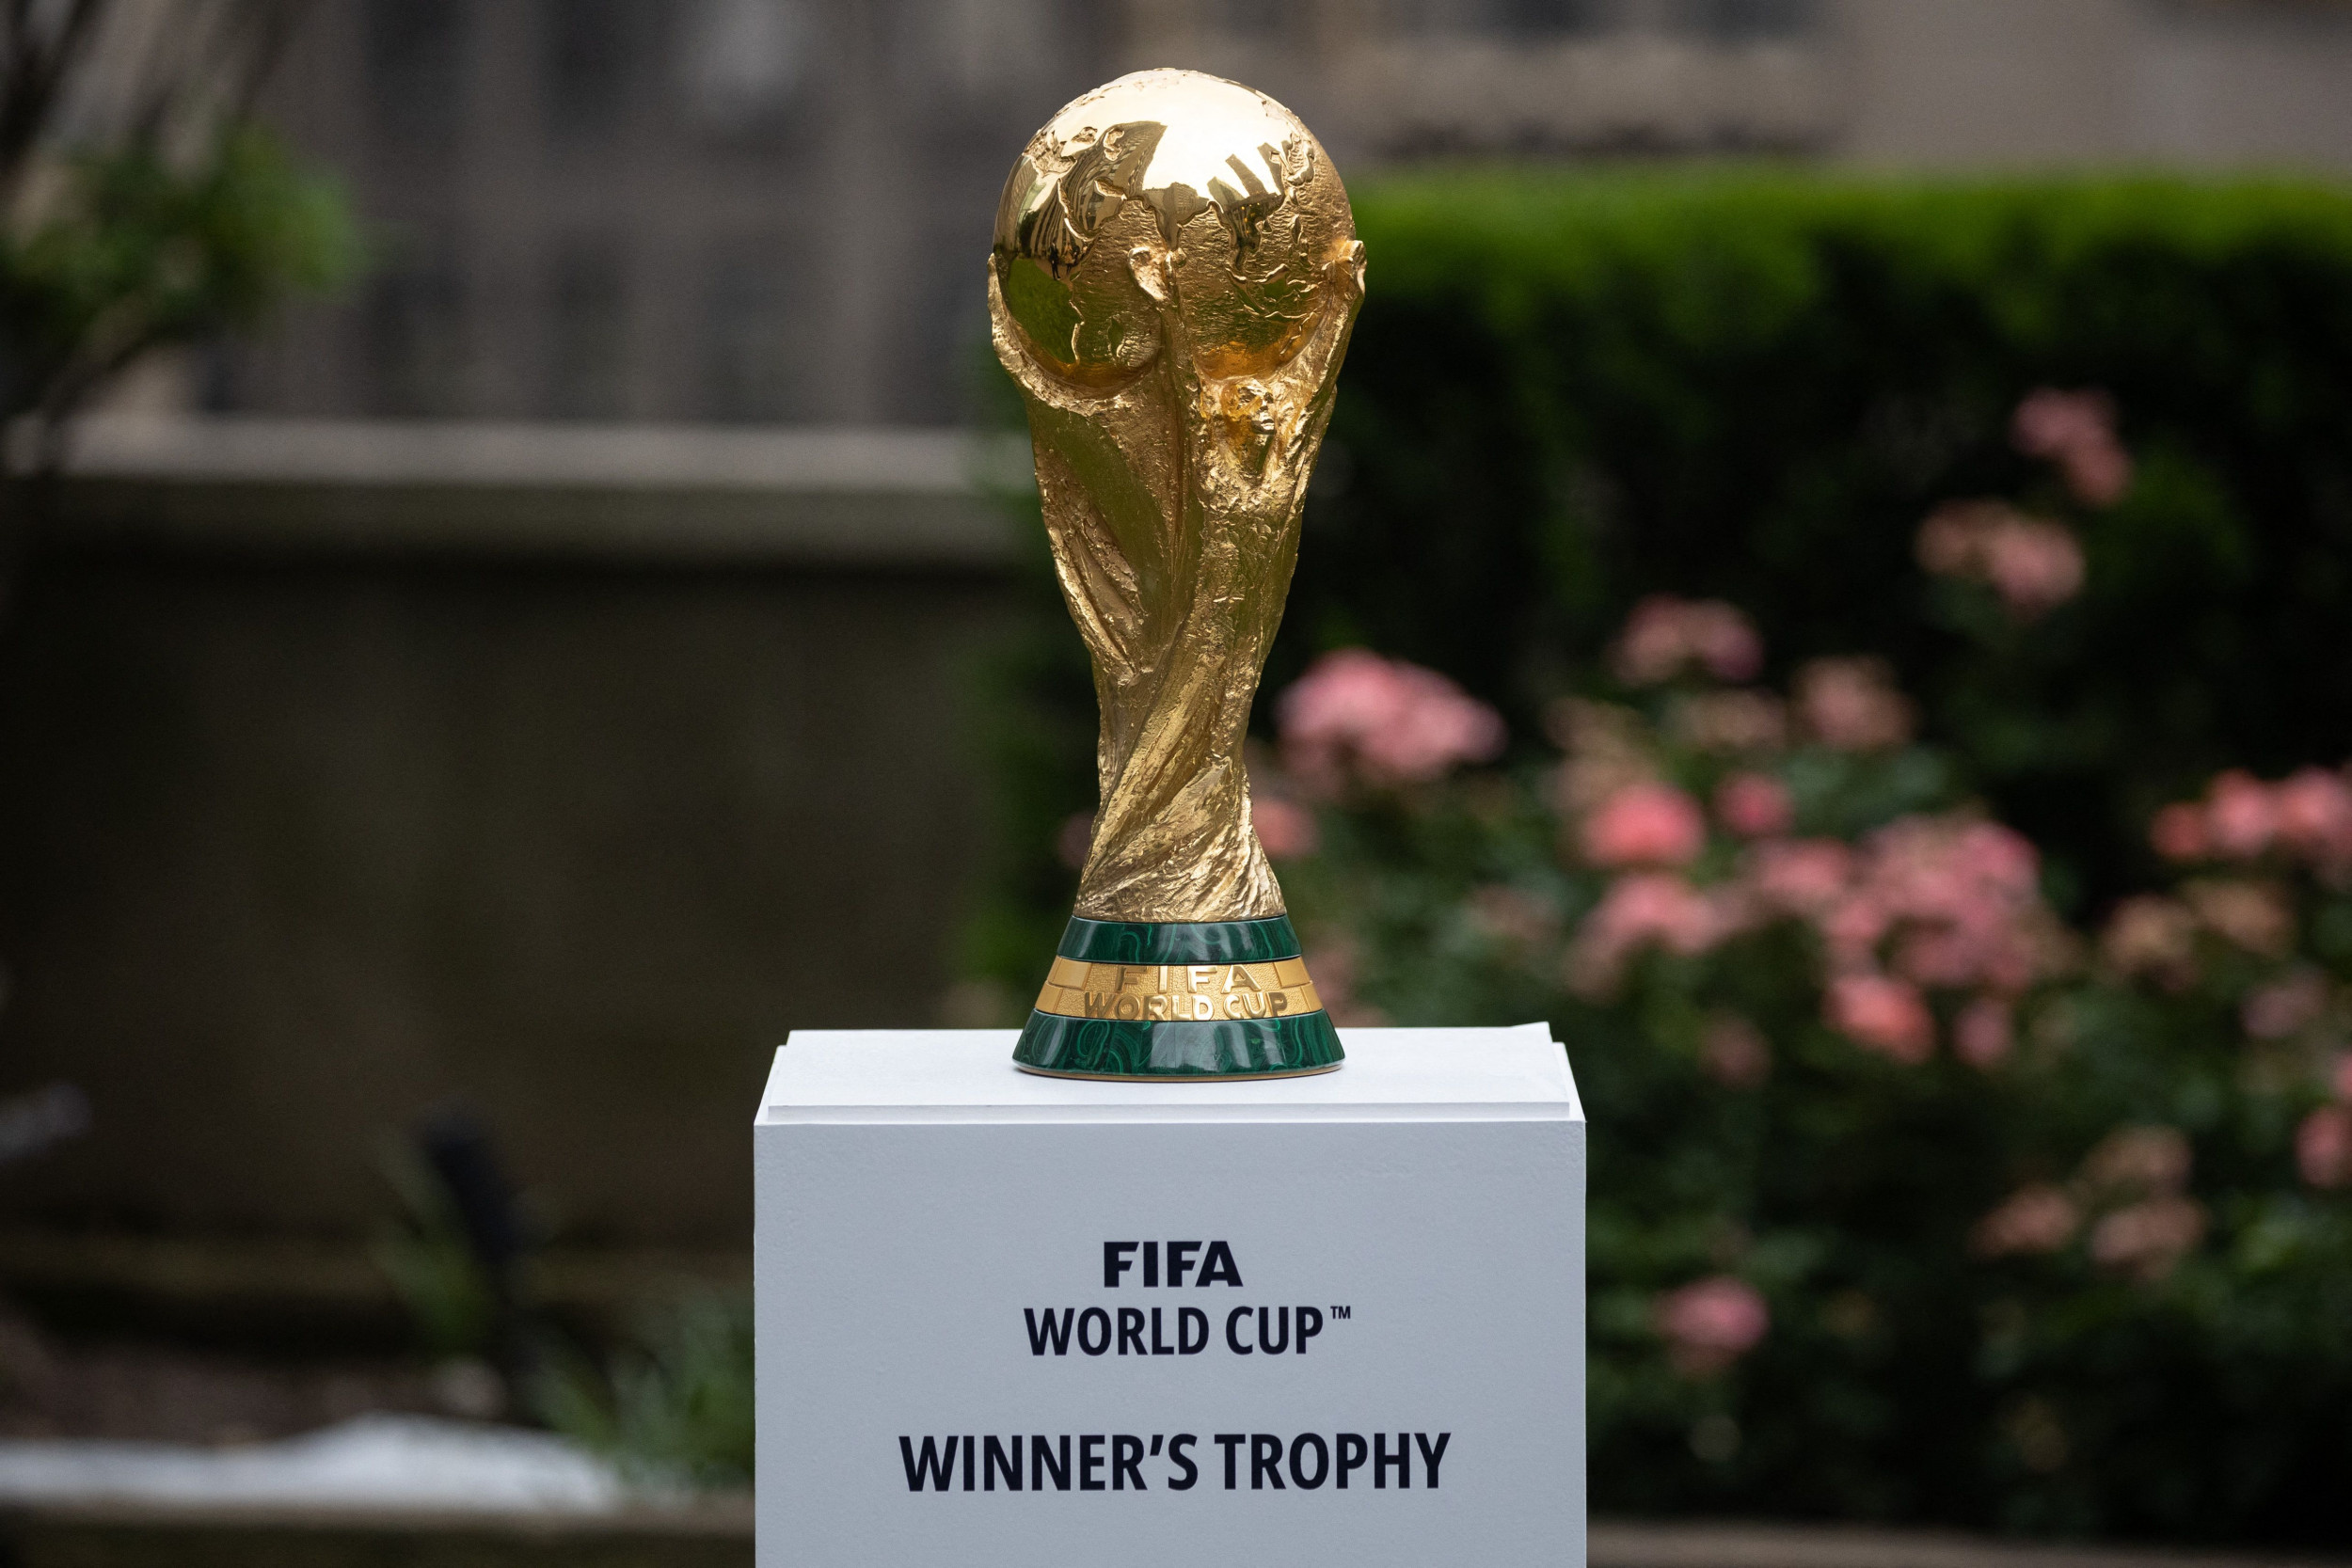 All About the 2026 FIFA World Cup- Details of the Showpiece Event